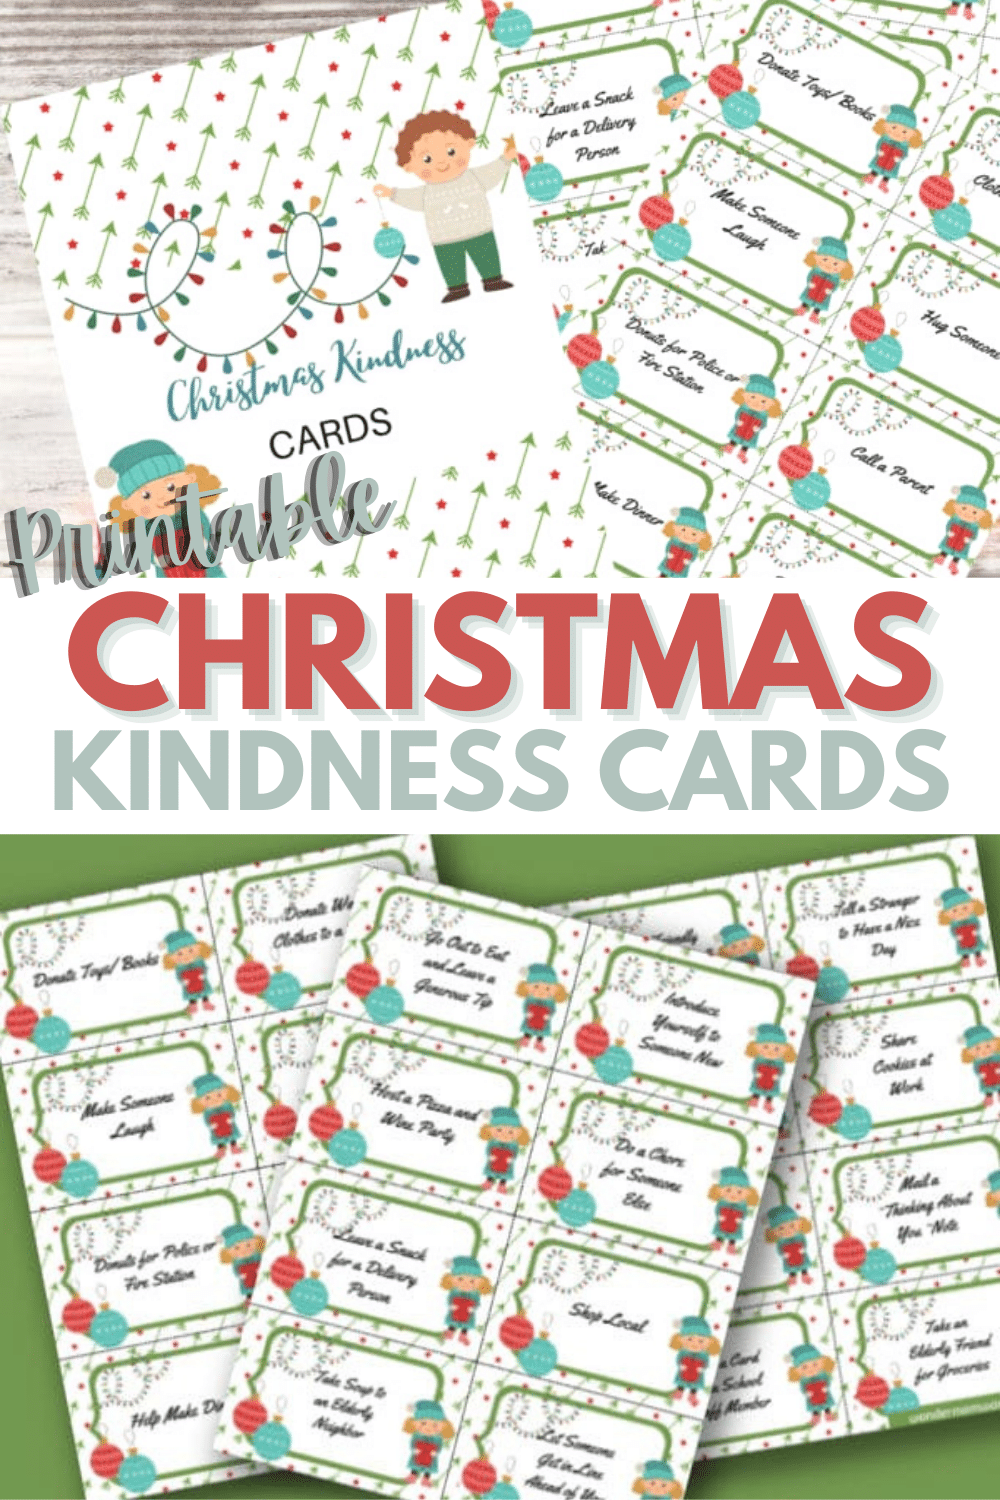 This set of printable Christmas kindness cards has four pages of acts of kindness that are perfect for your family to do this holiday season. #printables #randomactsofkindness #Christmas via @wondermomwannab